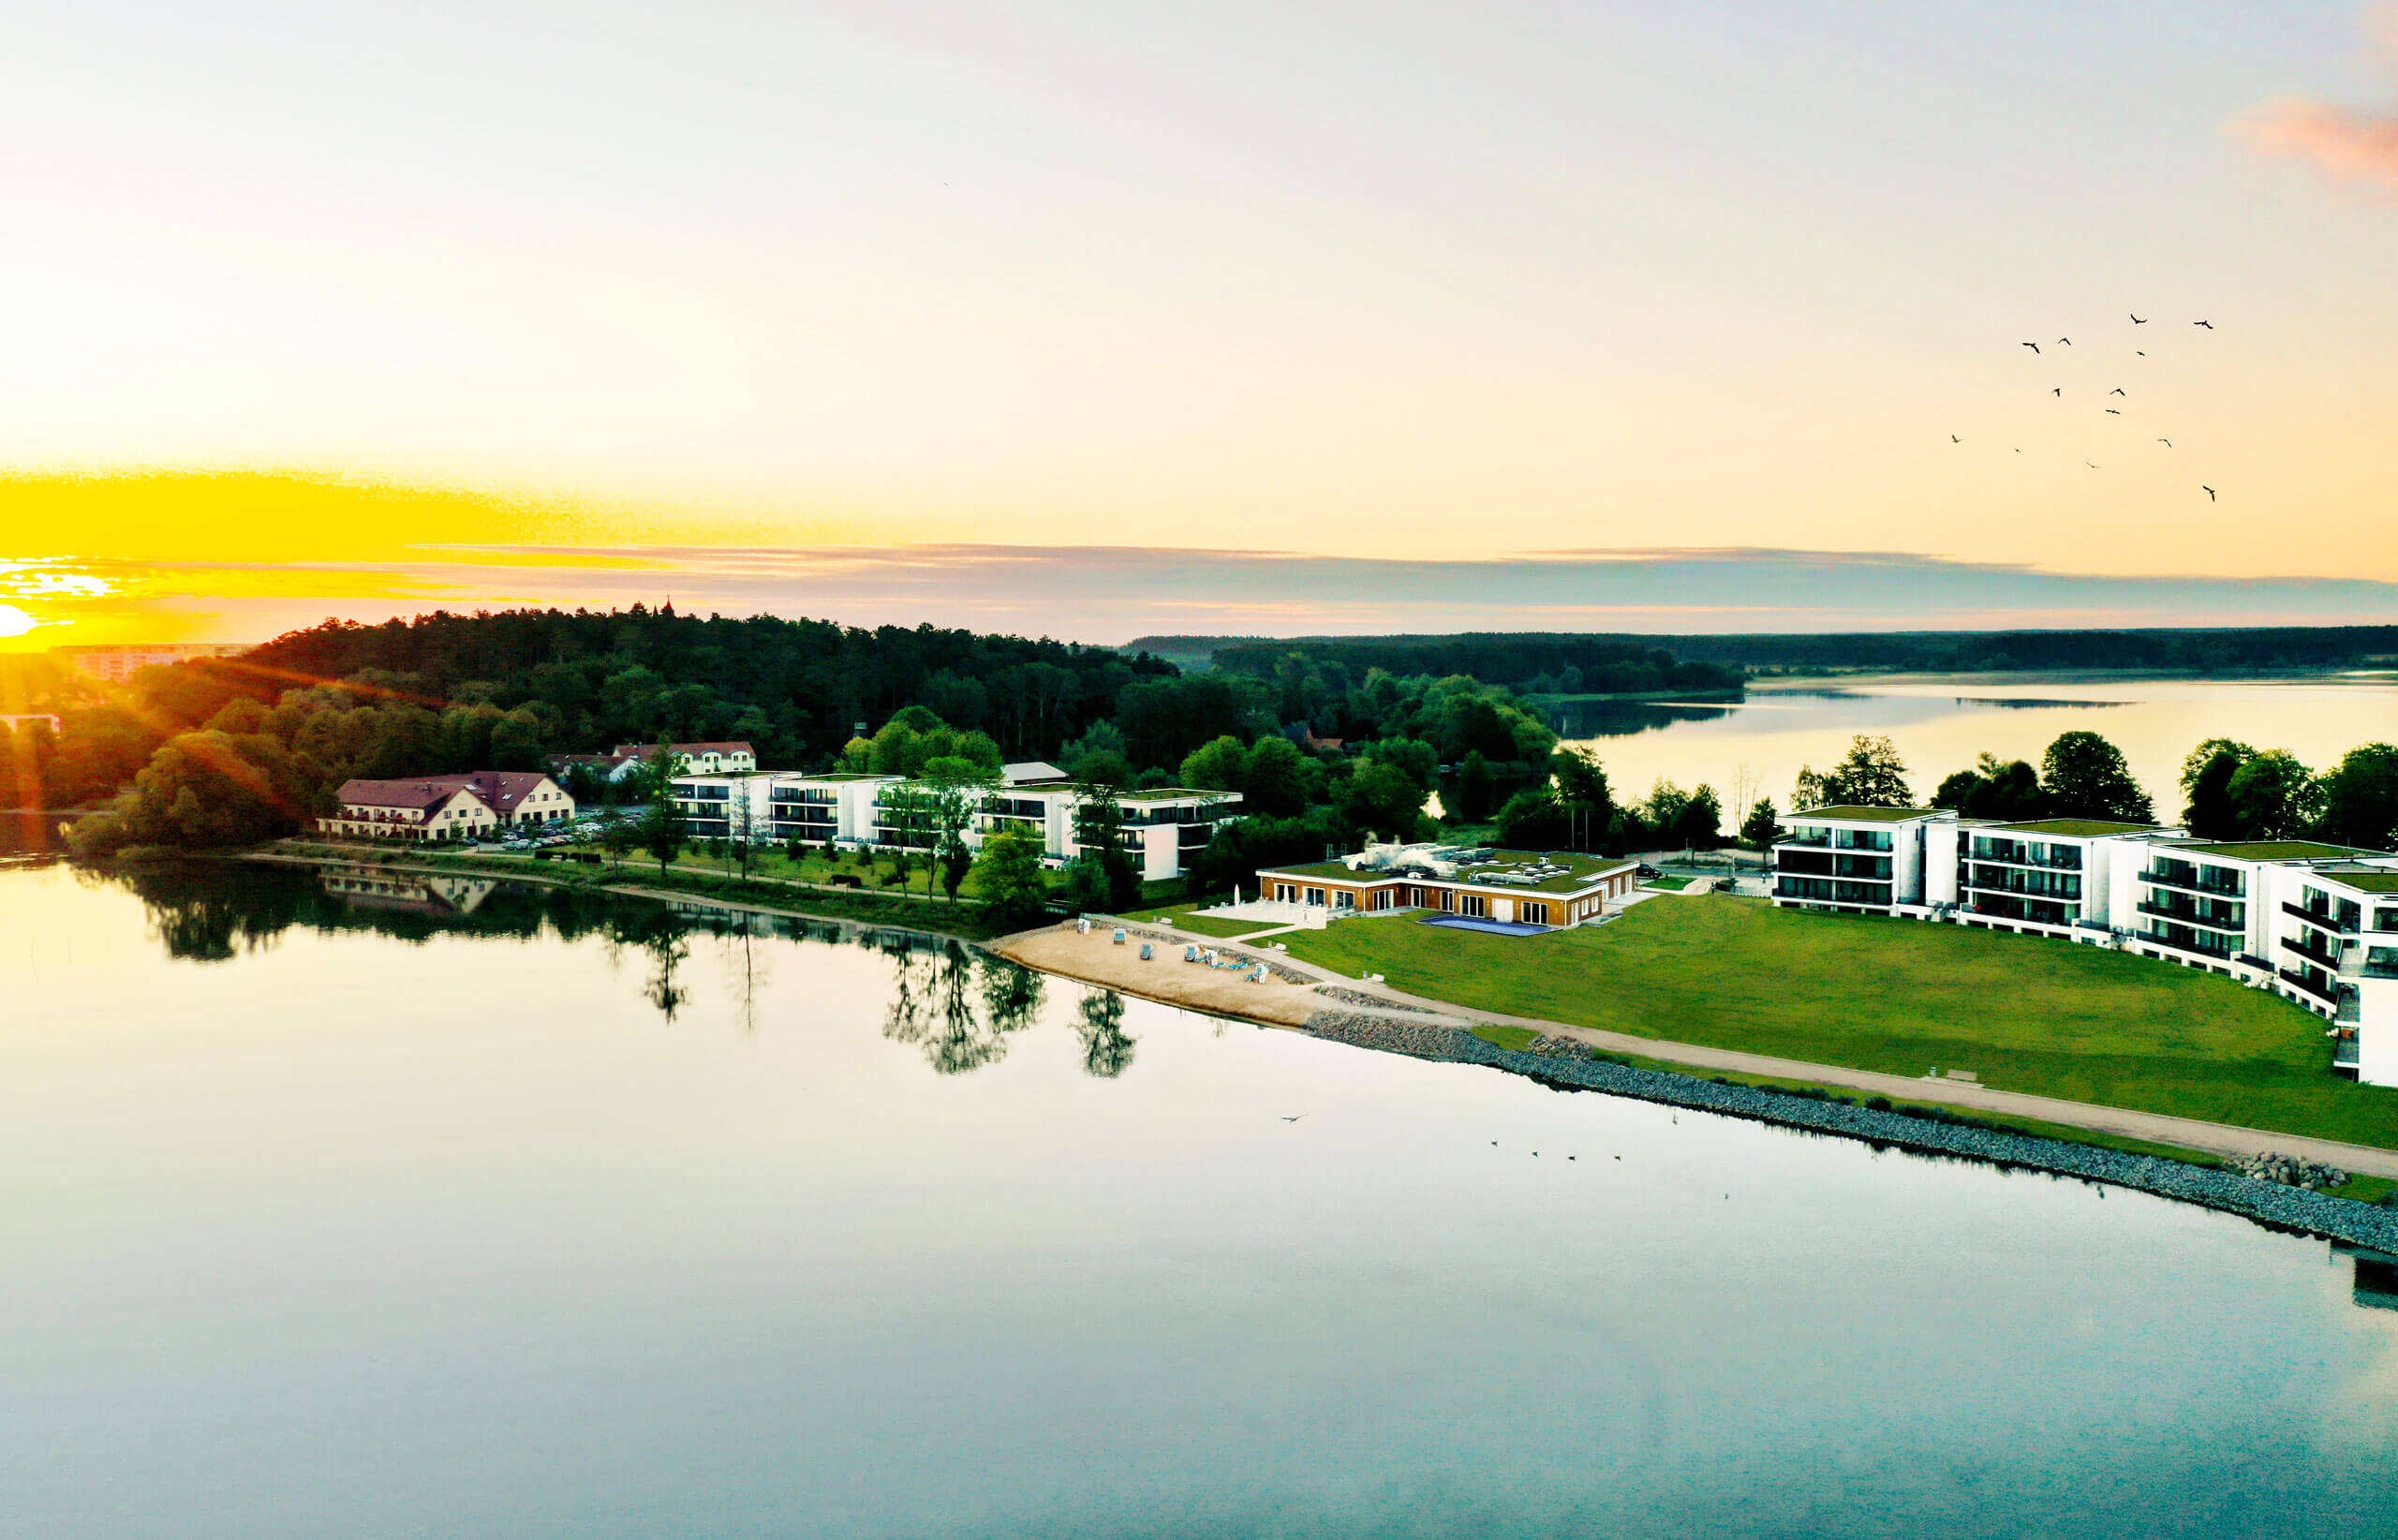 A serene landscape of Maremüritz Yachthafen Resort & Spa nestled by a body of water and vibrant